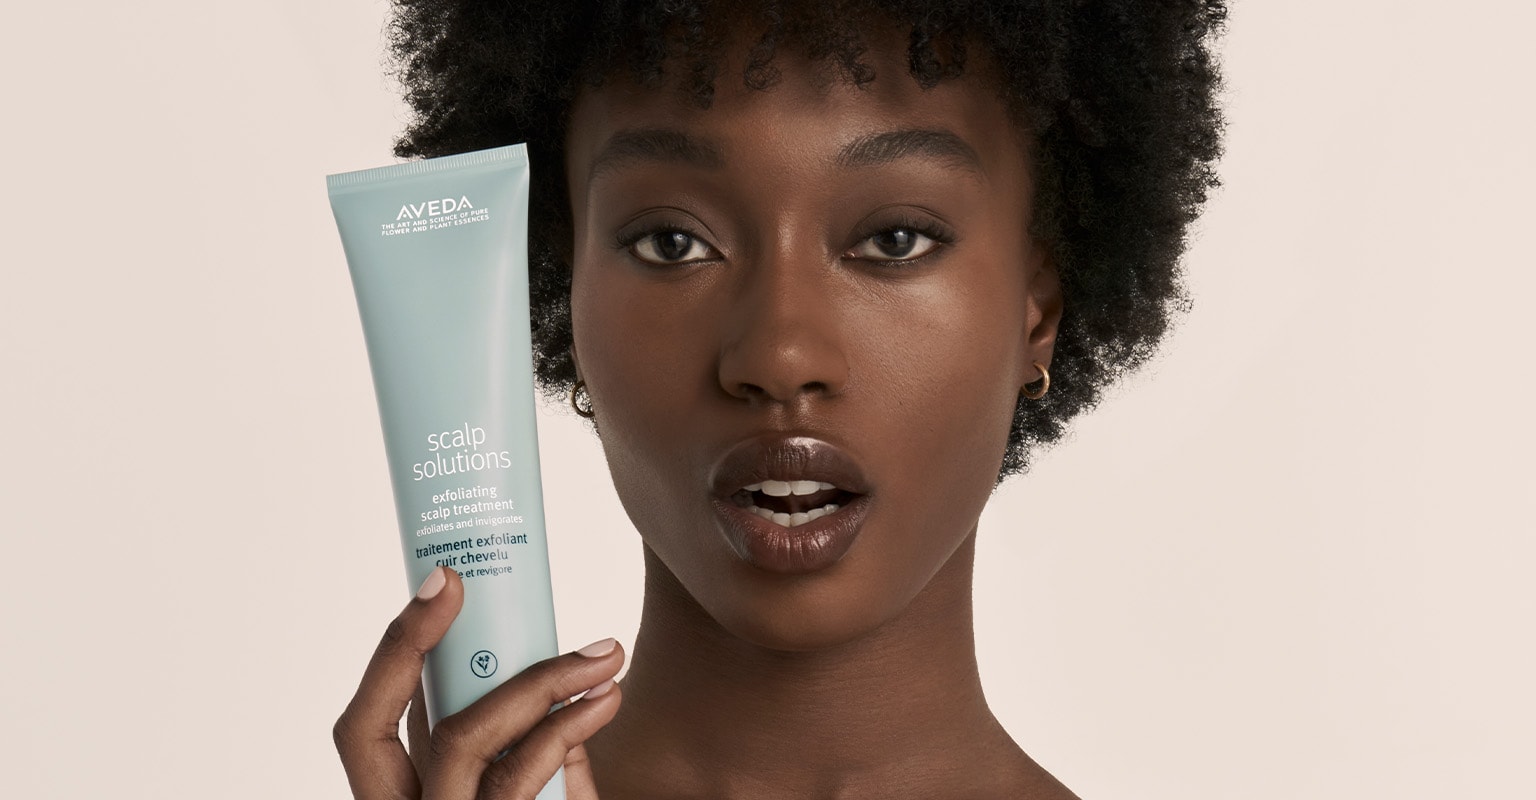 Shop Aveda's scalp solutions exfoliating scalp treatment instantly reduces scalp oil by 76%